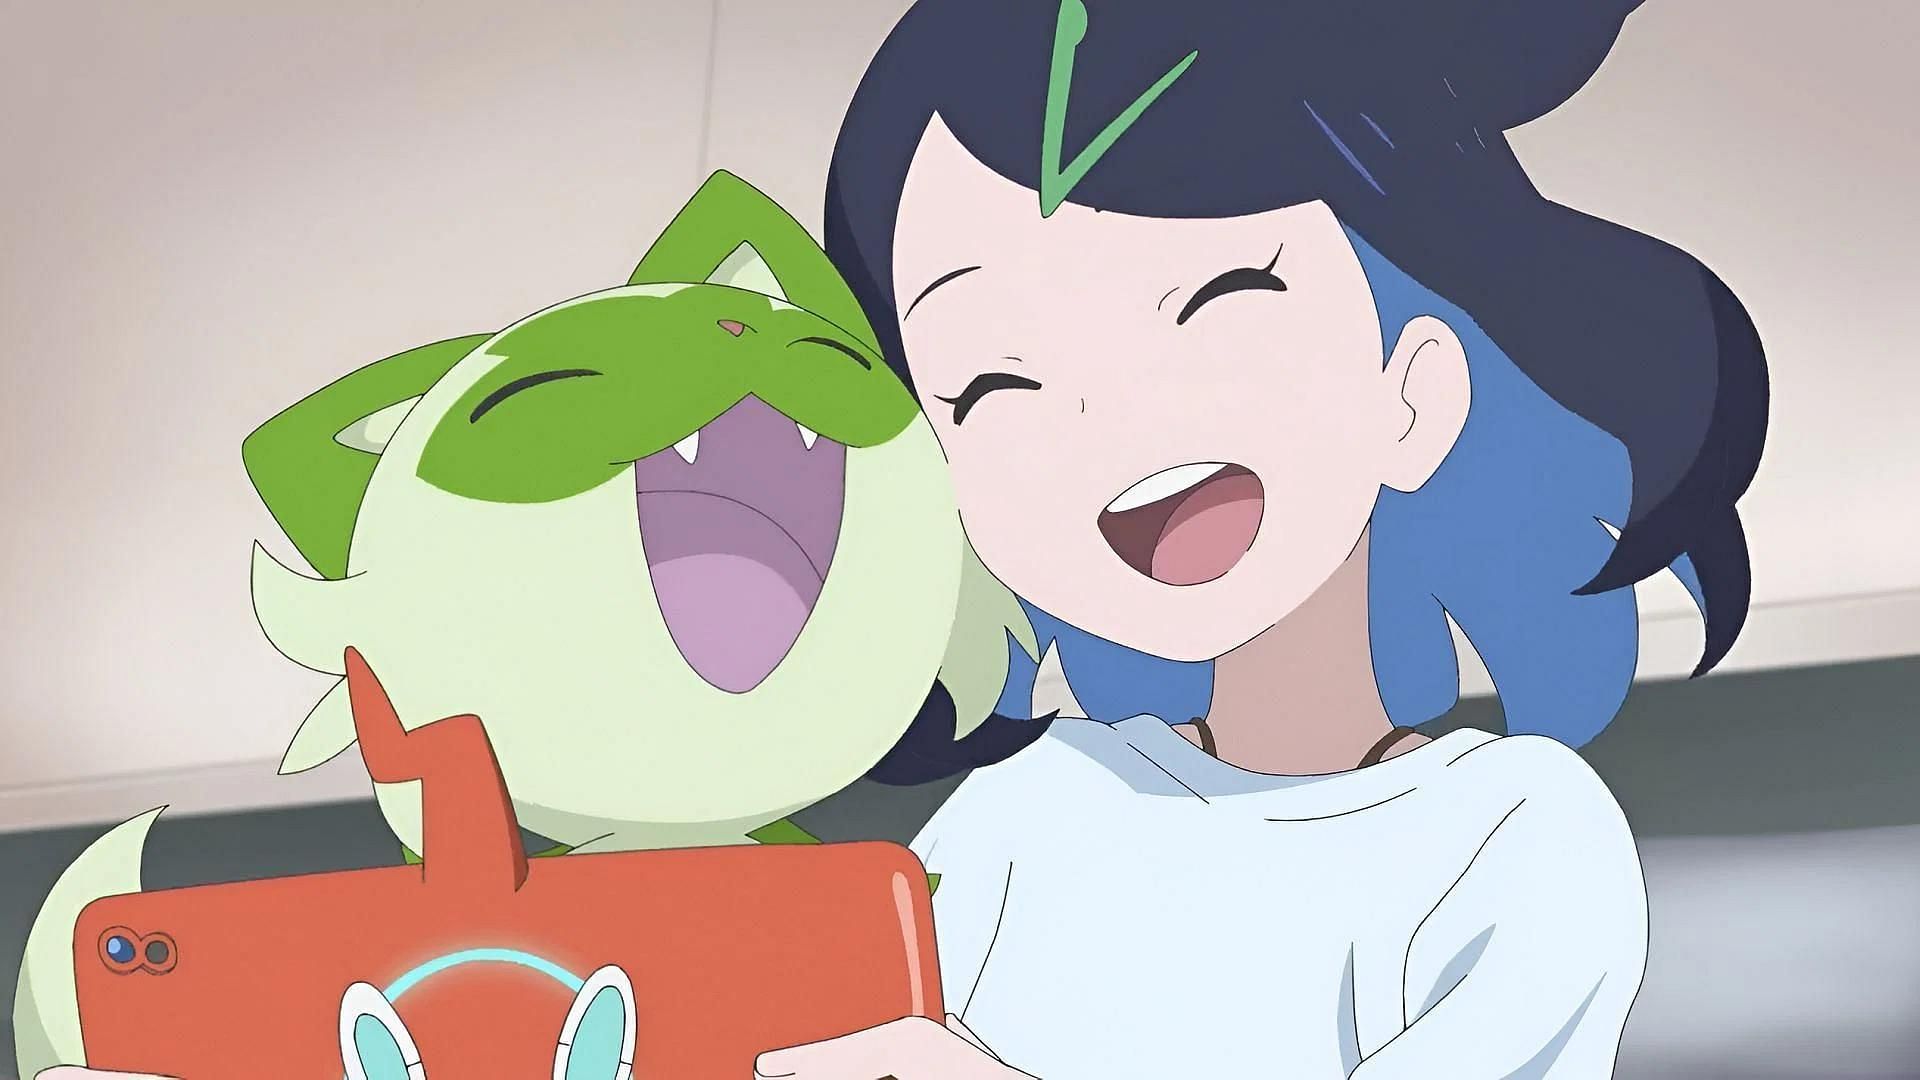 Pokémon Horizons: The Series reveals new spin-off manga and launch date